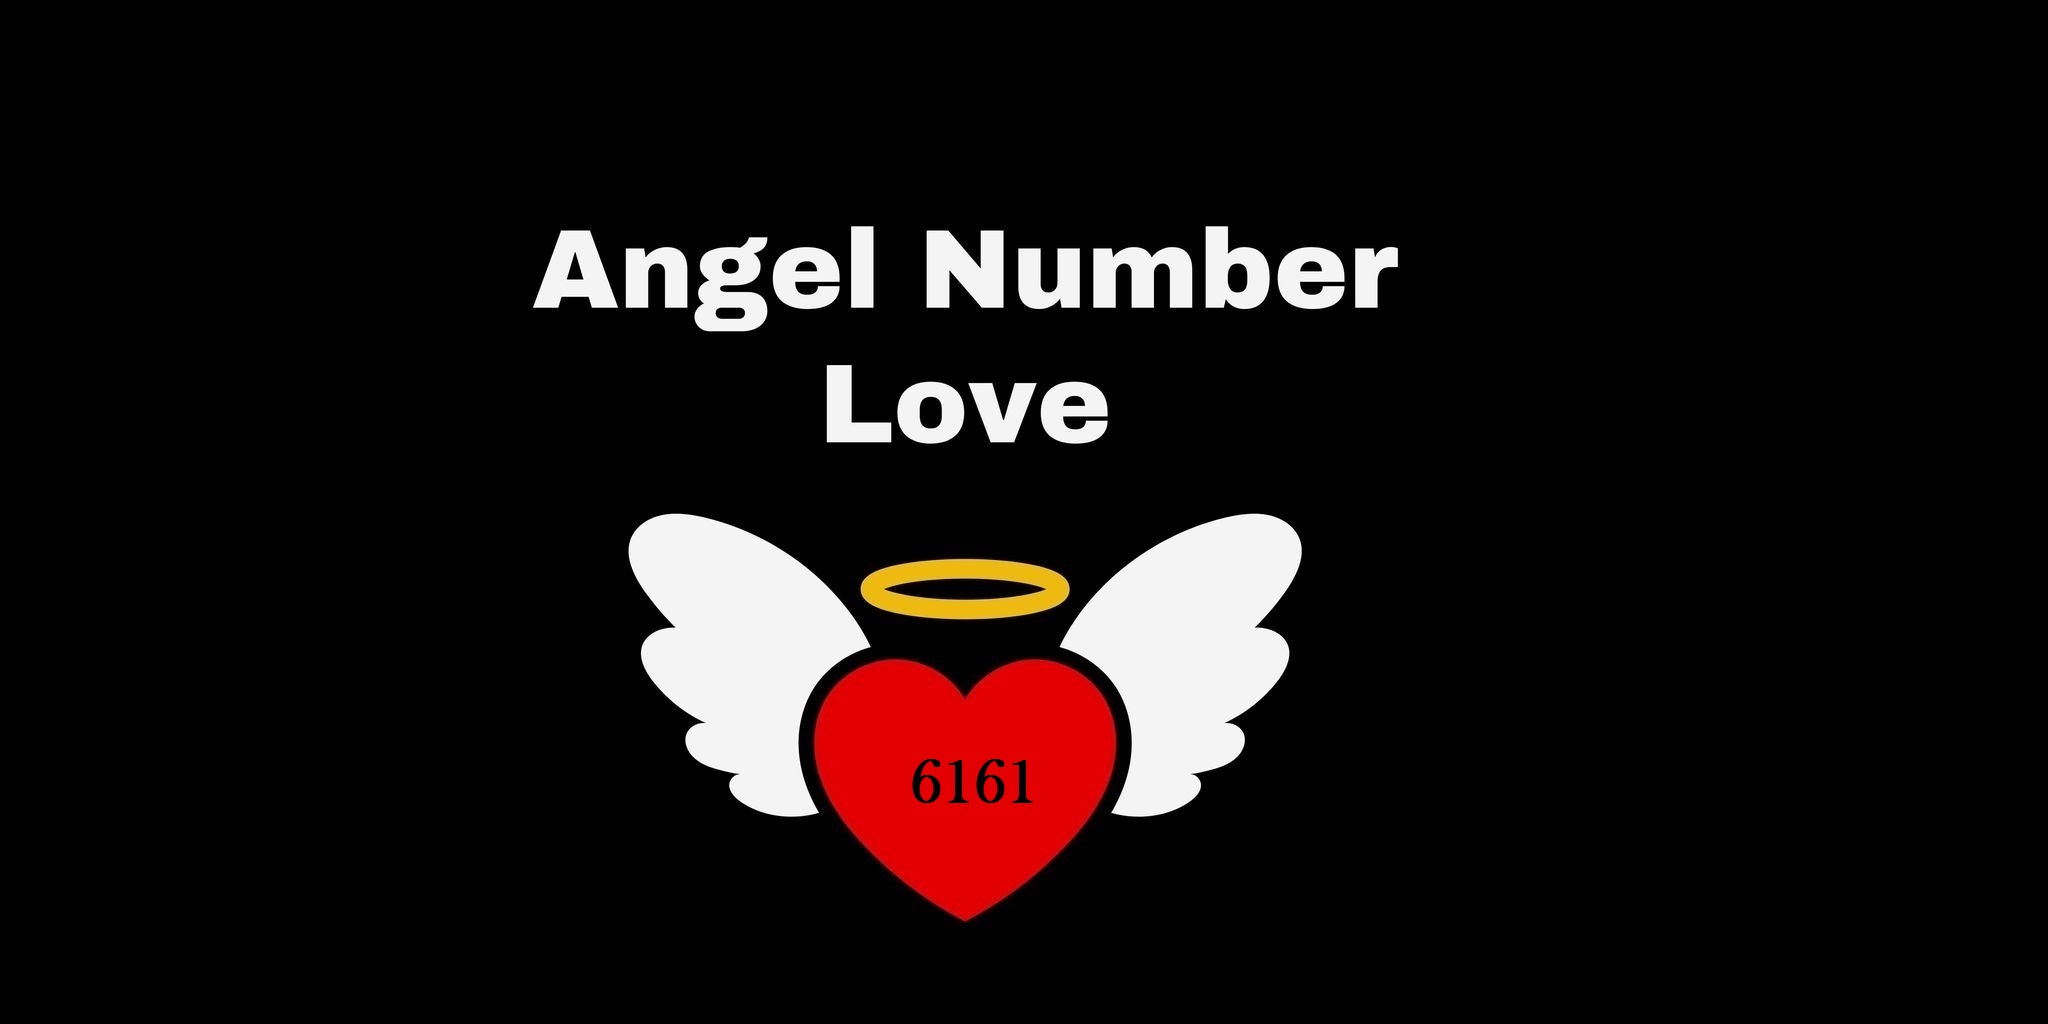 6161 Angel Number Meaning In Love